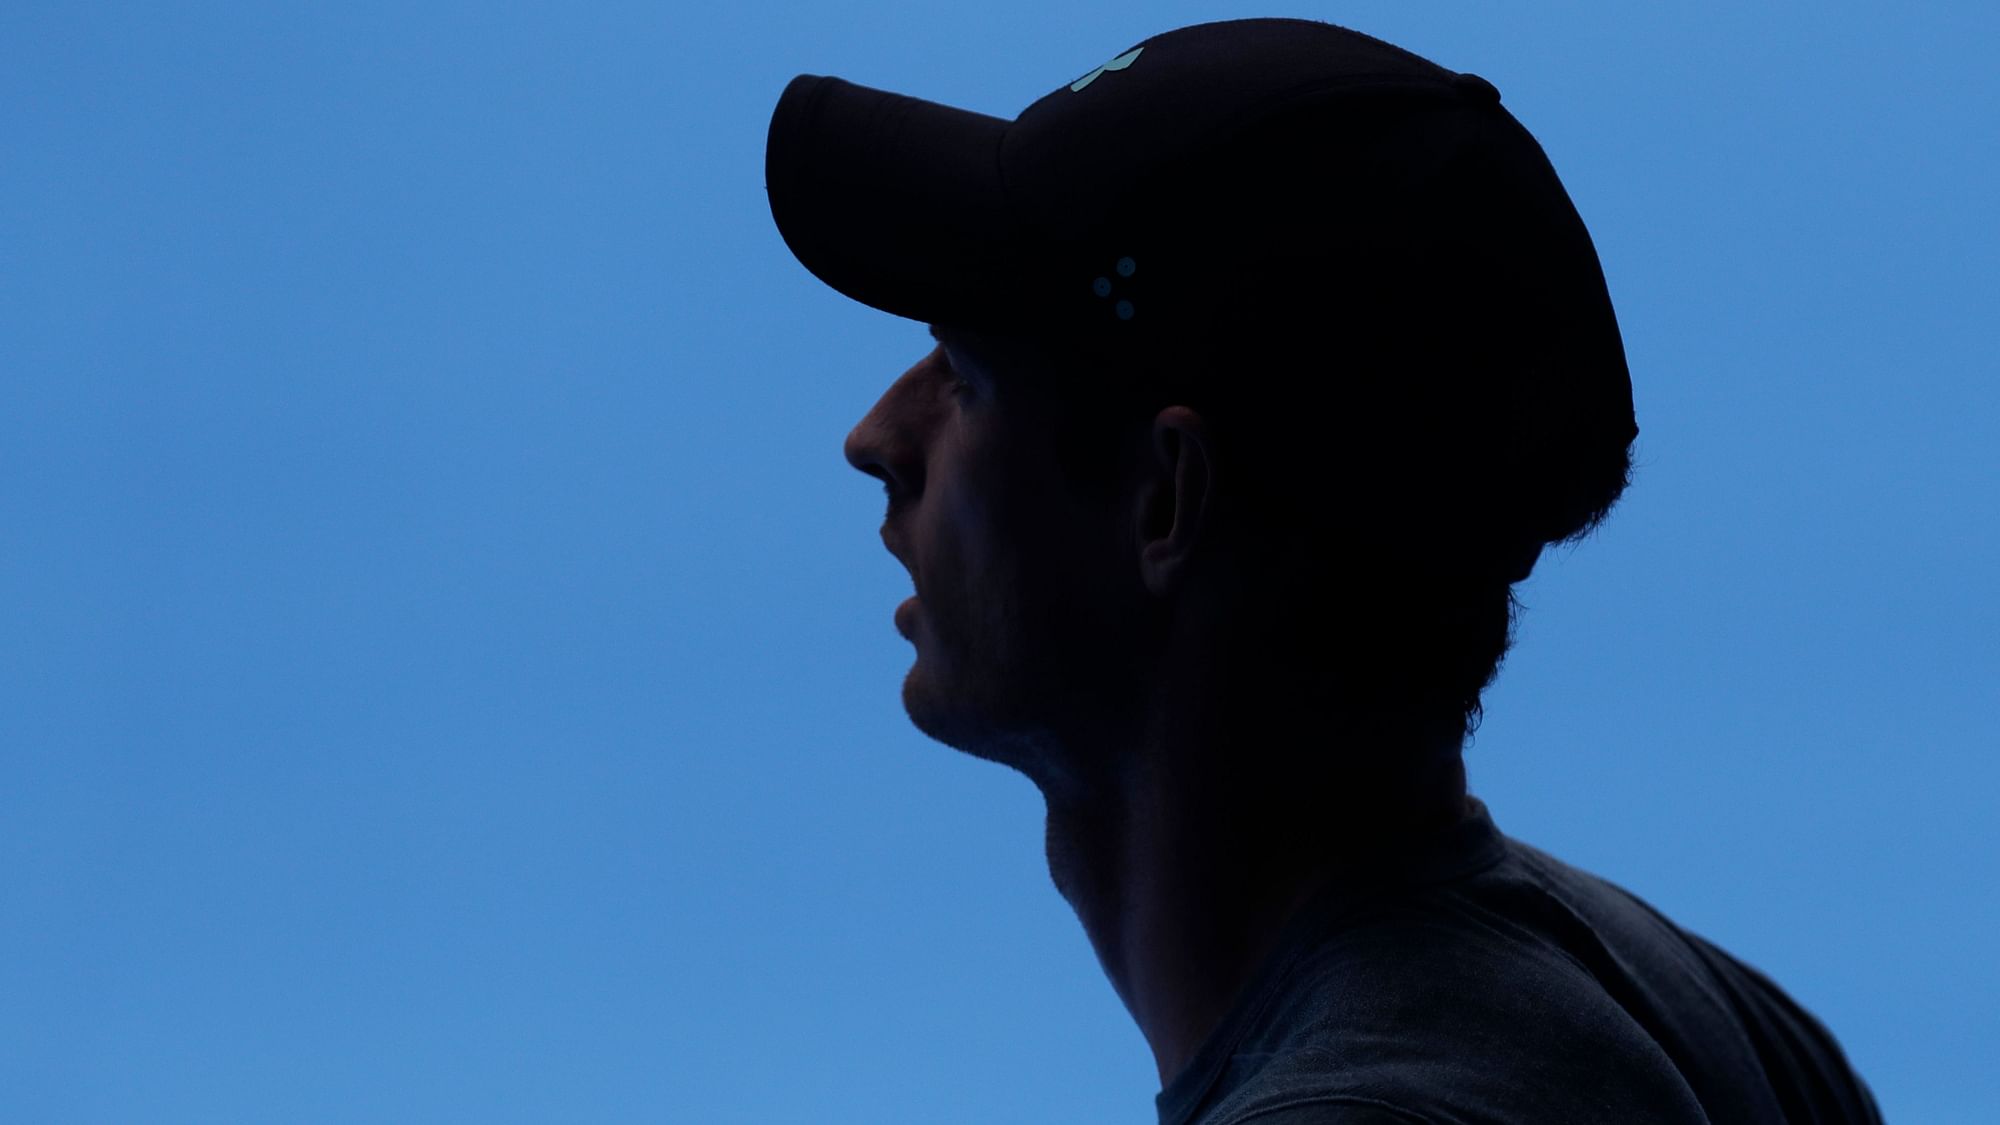 Andy Murray pictured during a practice session in Melbourne ahead of the Australian Open 2019.